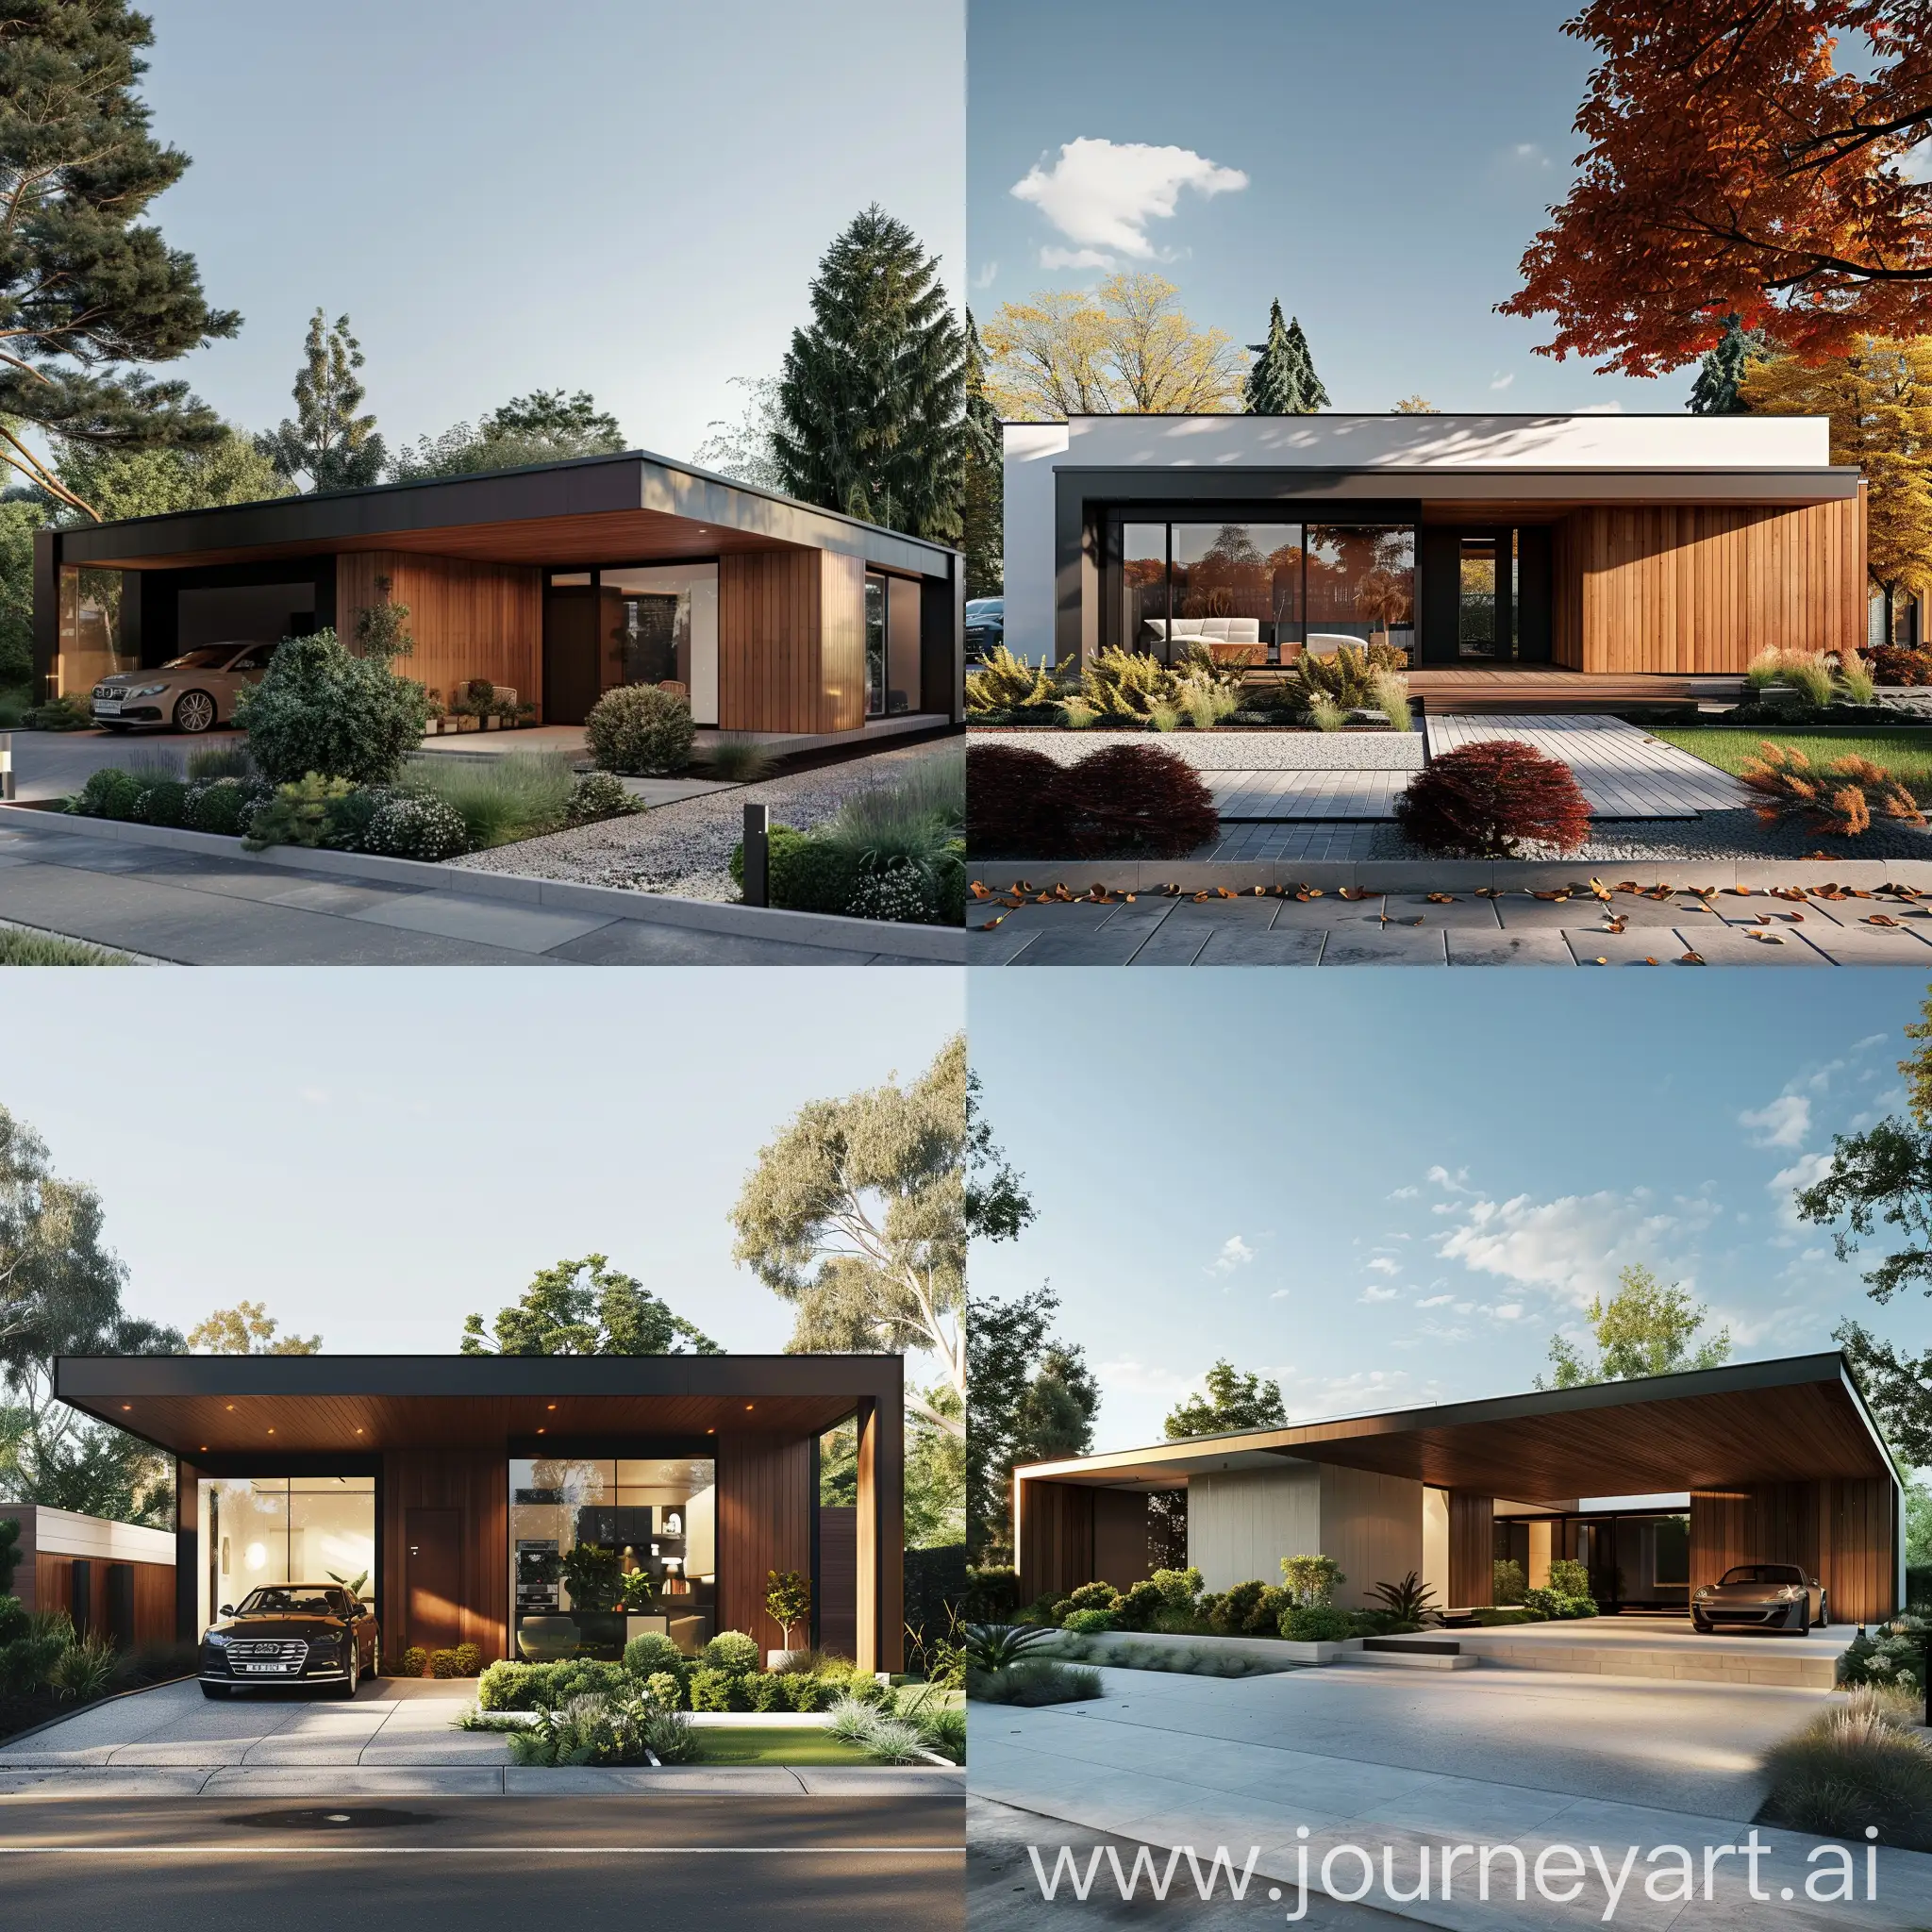  The image displays a modern single-story house with a flat roof and a covered garage. real 3d, realistic render, The house features a wooden exterior and a white interior.